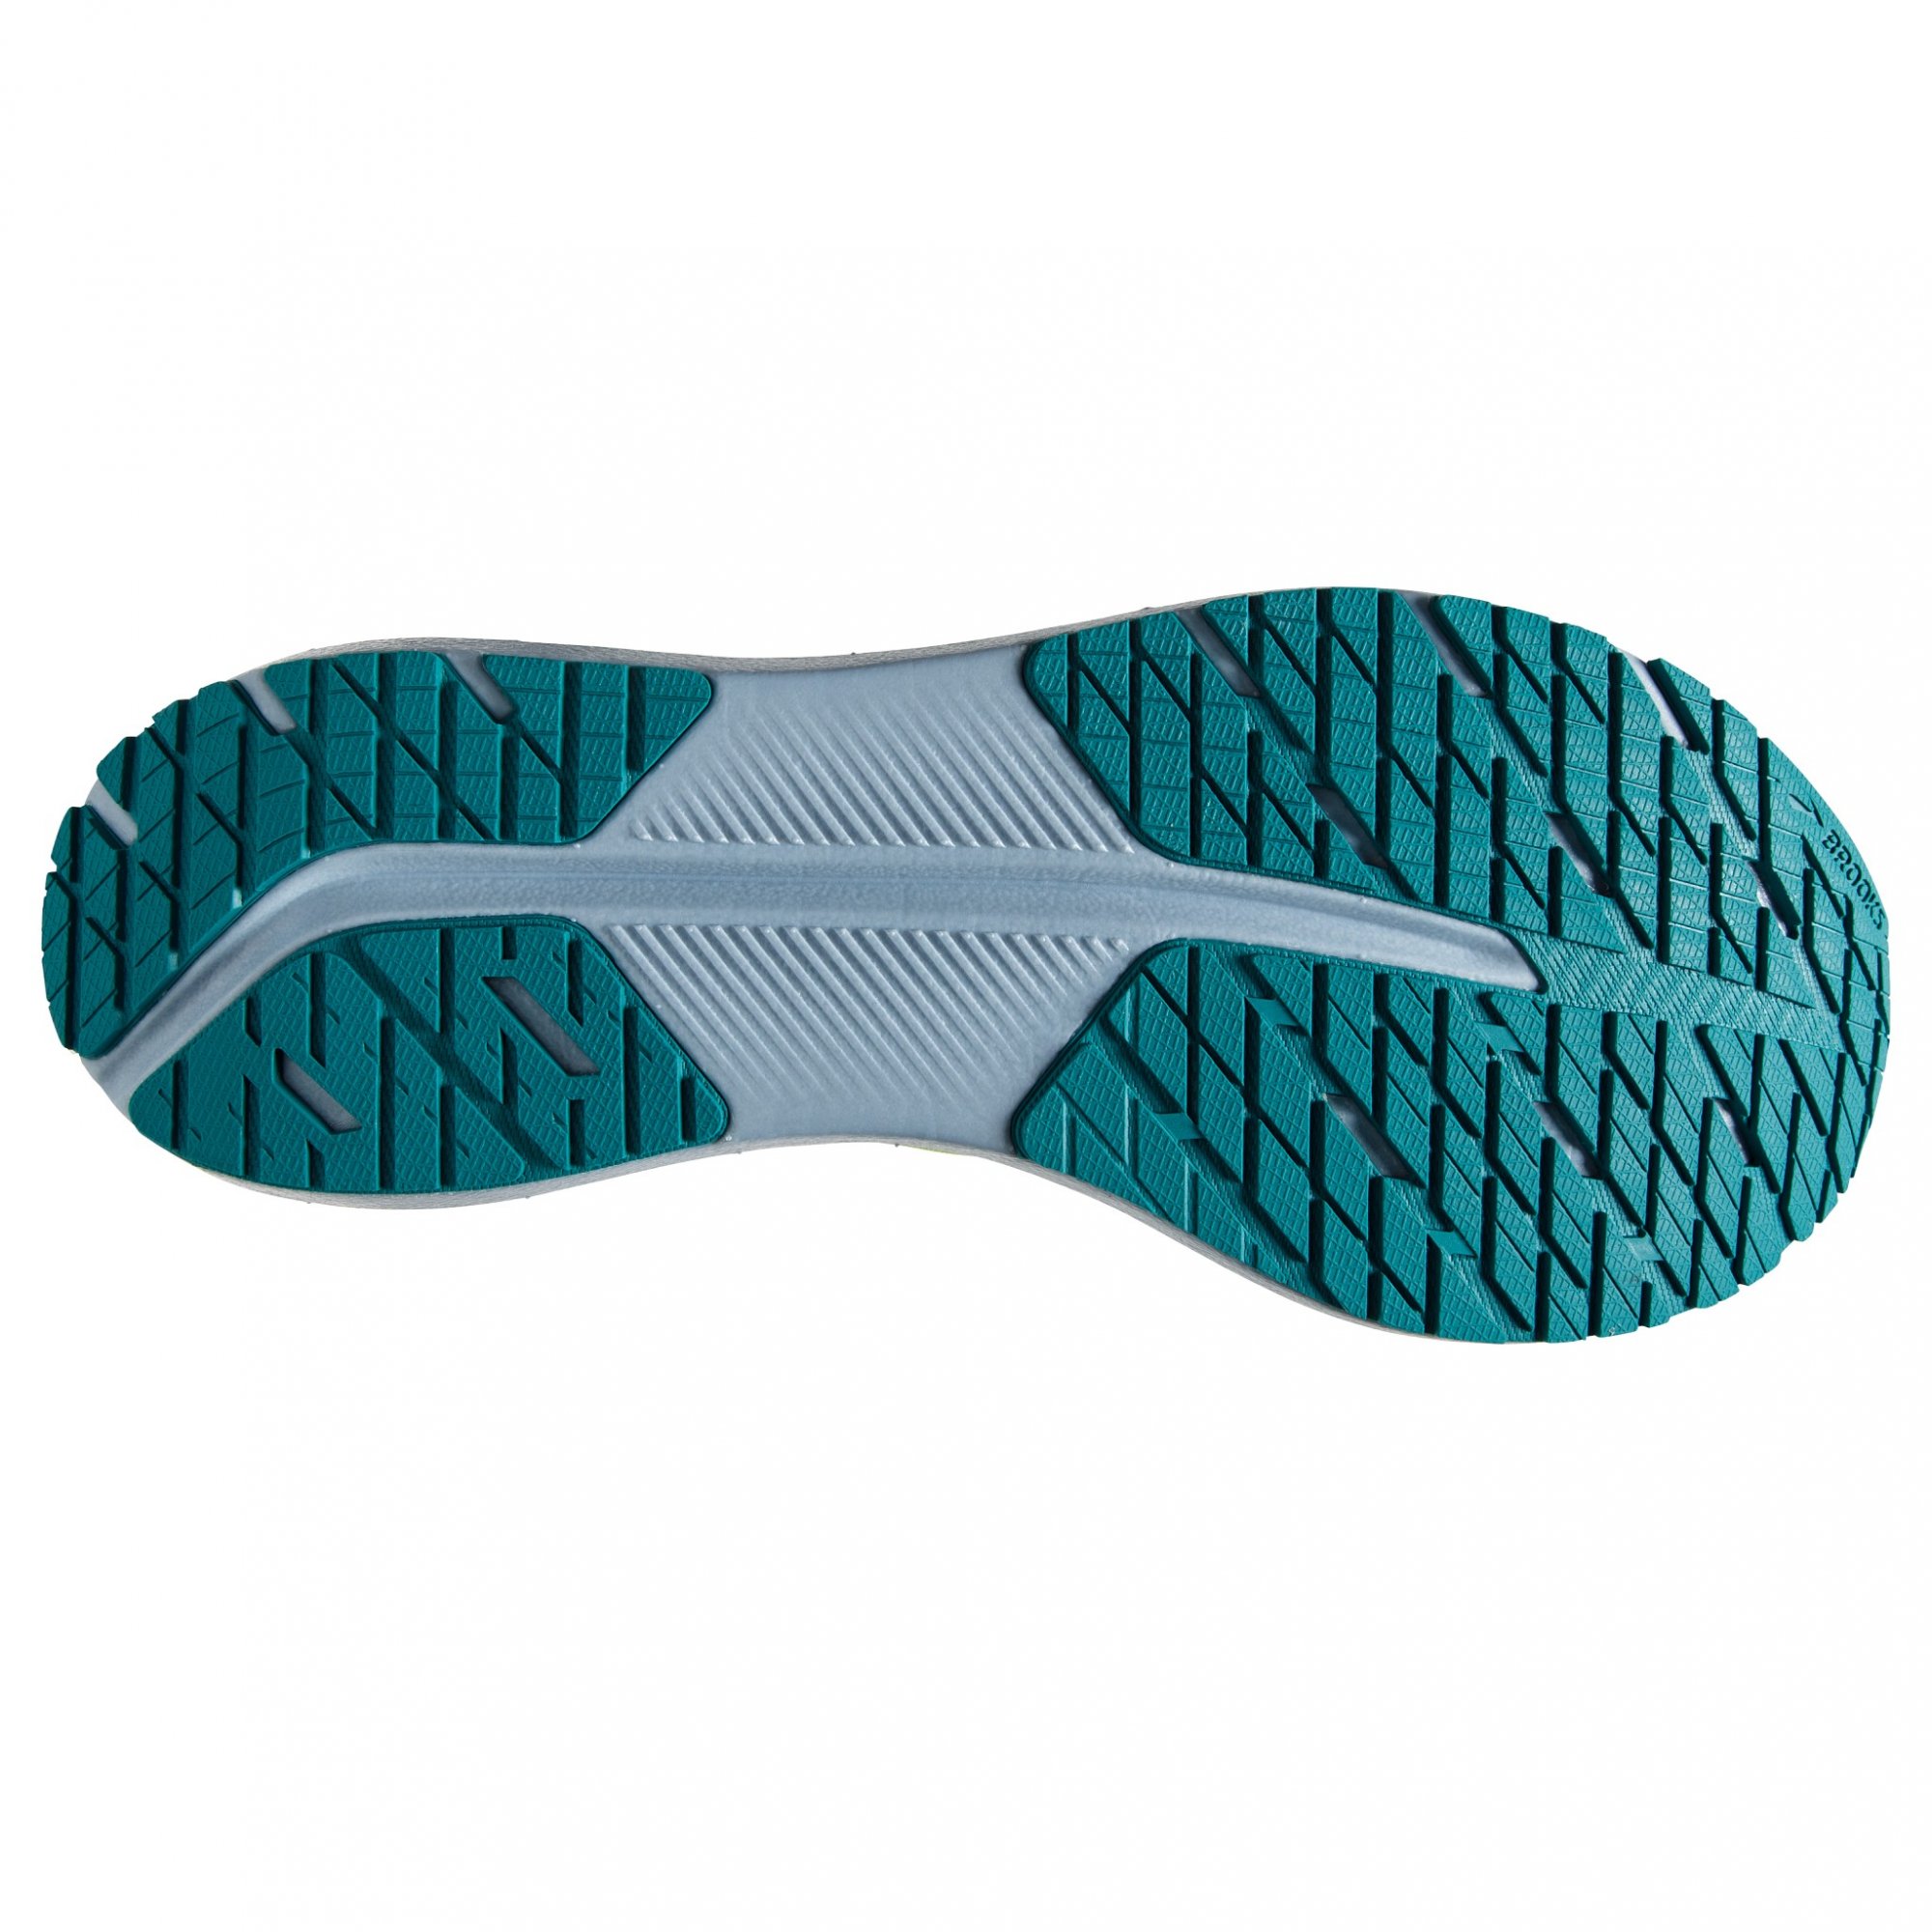 BROOKS Hyperion Tempo Green/Kayaking/Dusty Blue